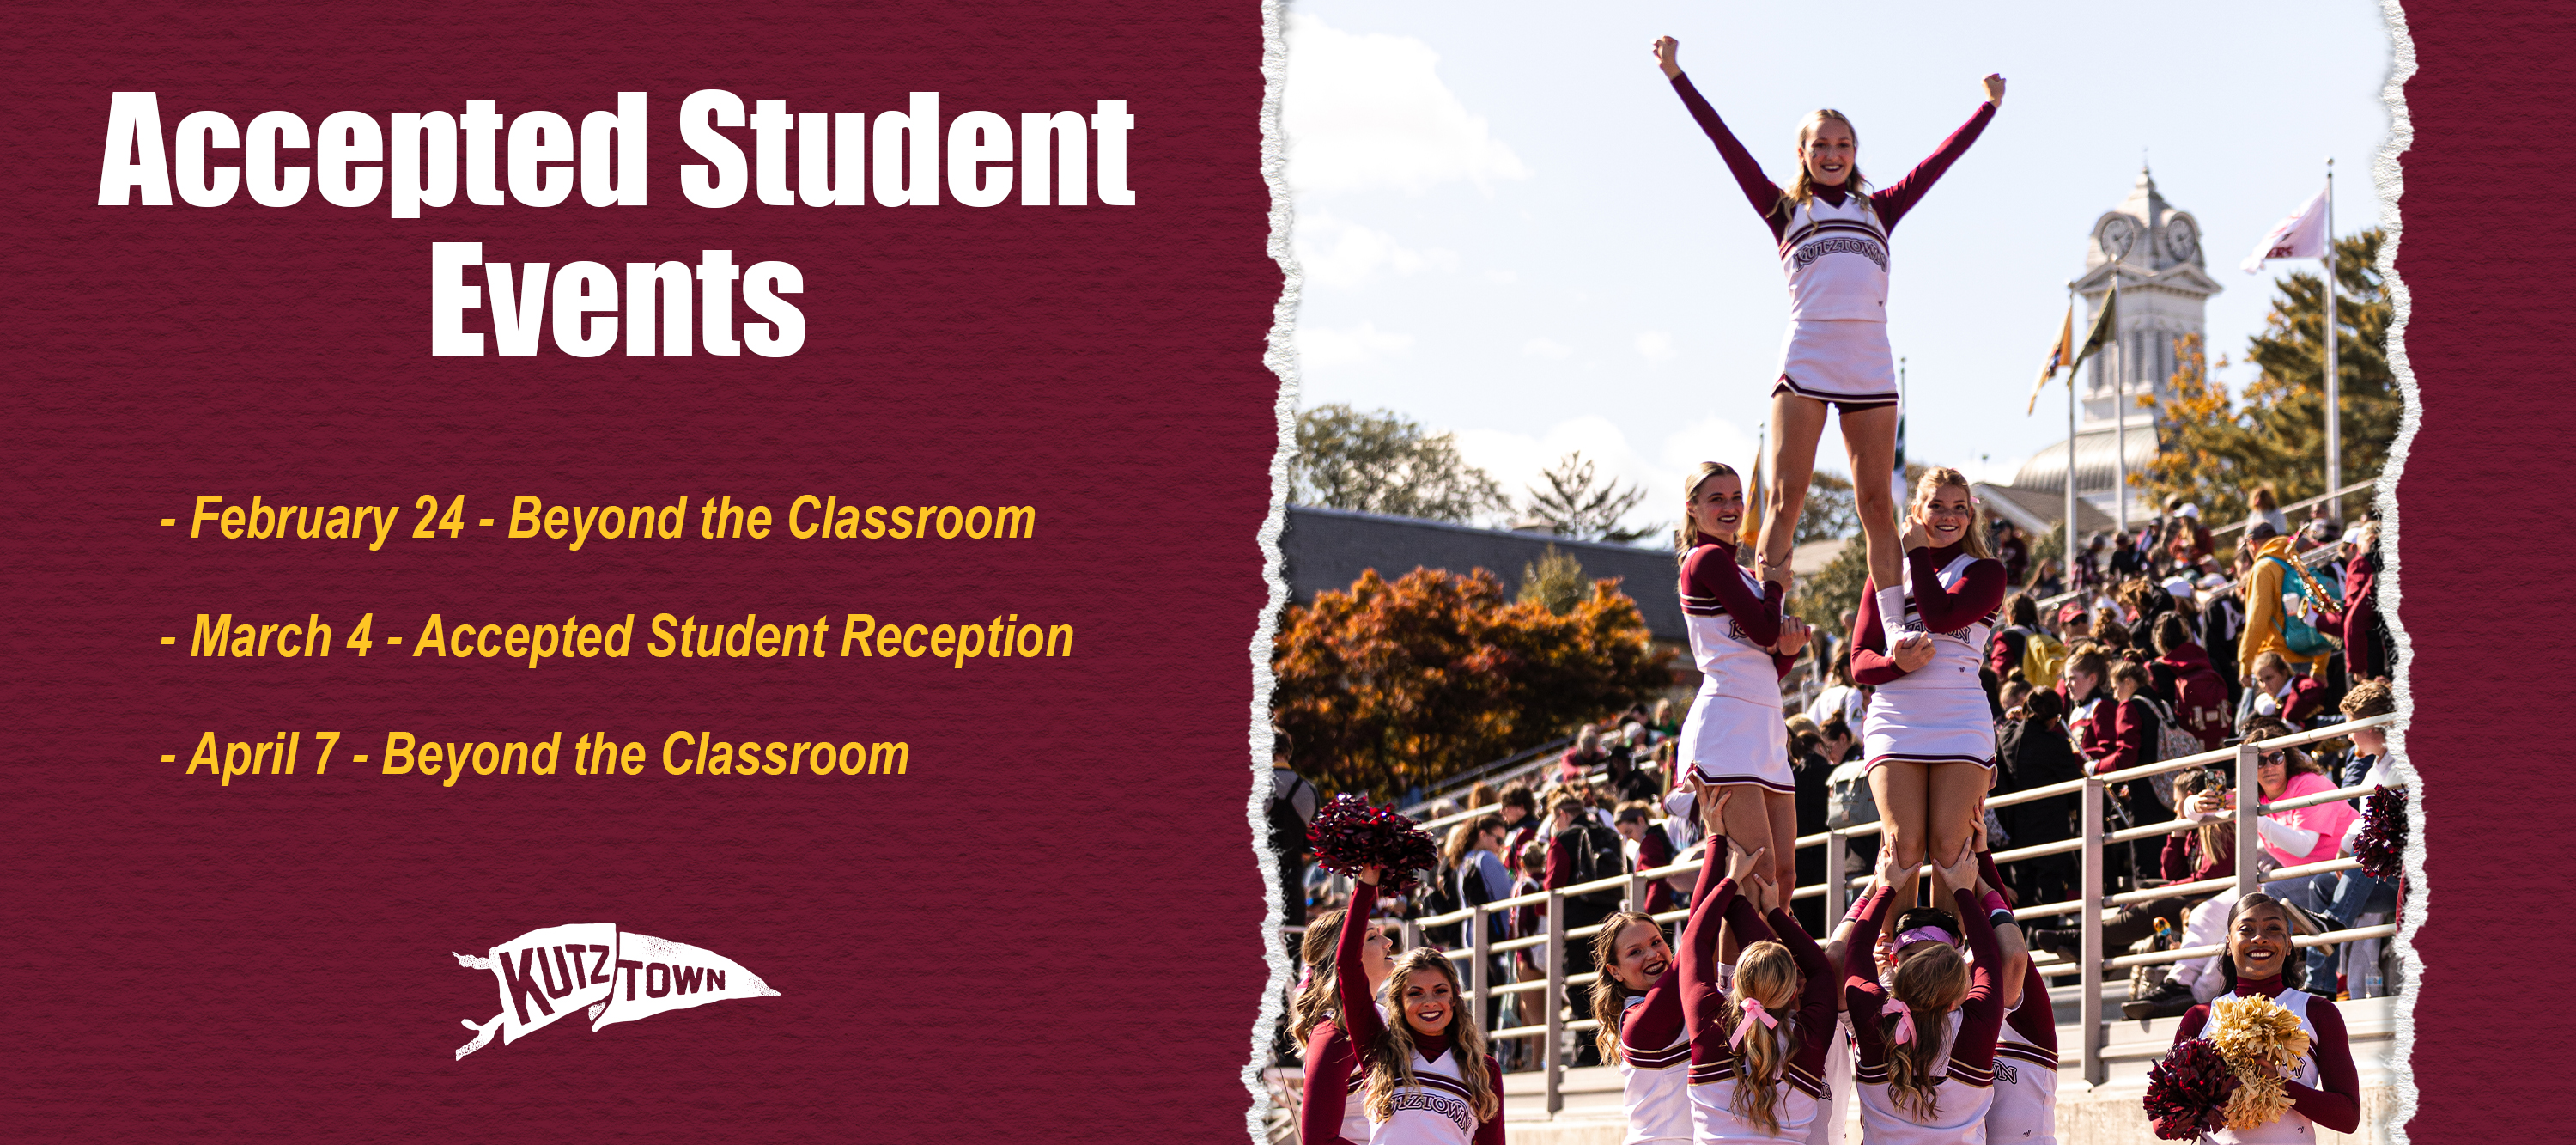 Accepted Students Events flyer with a group of cheerleaders in pyramid formation at a football game on the right and events listed on the left, including Beyond the Classroom on February 24 Accepted Student Reception on March 4 and Beyond the Classroom 2 on April 7